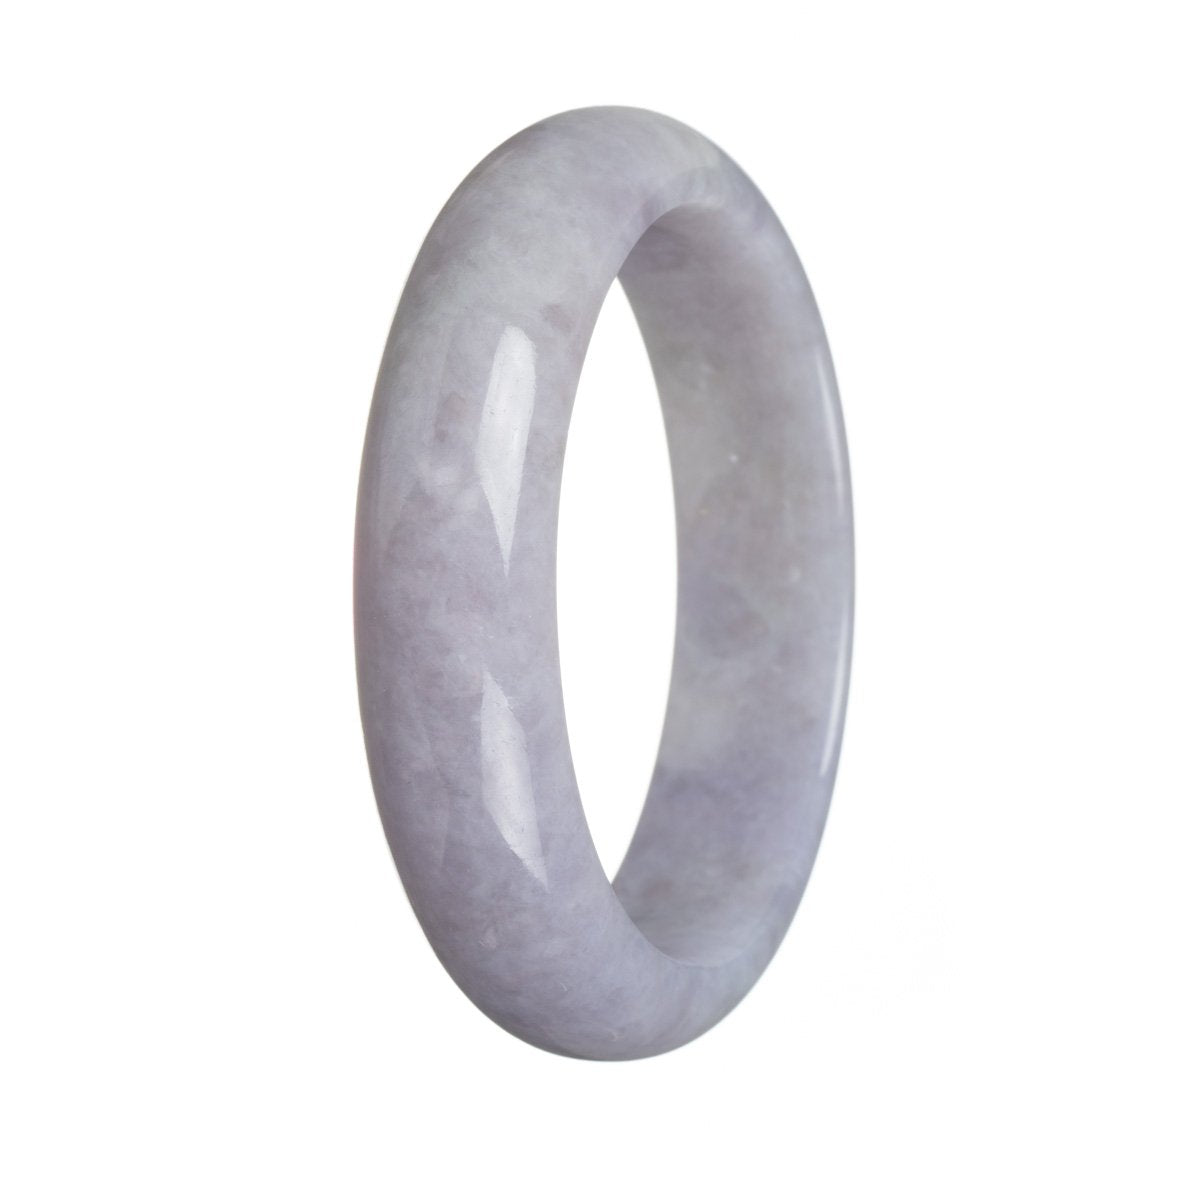 A close-up photo of an exquisite lavender jadeite jade bracelet. The bracelet features Grade A quality stones in a half-moon shape, measuring 61mm in diameter. The lavender hue adds an elegant touch to the overall design. Crafted by MAYS GEMS, this bracelet is a true symbol of authenticity and beauty.